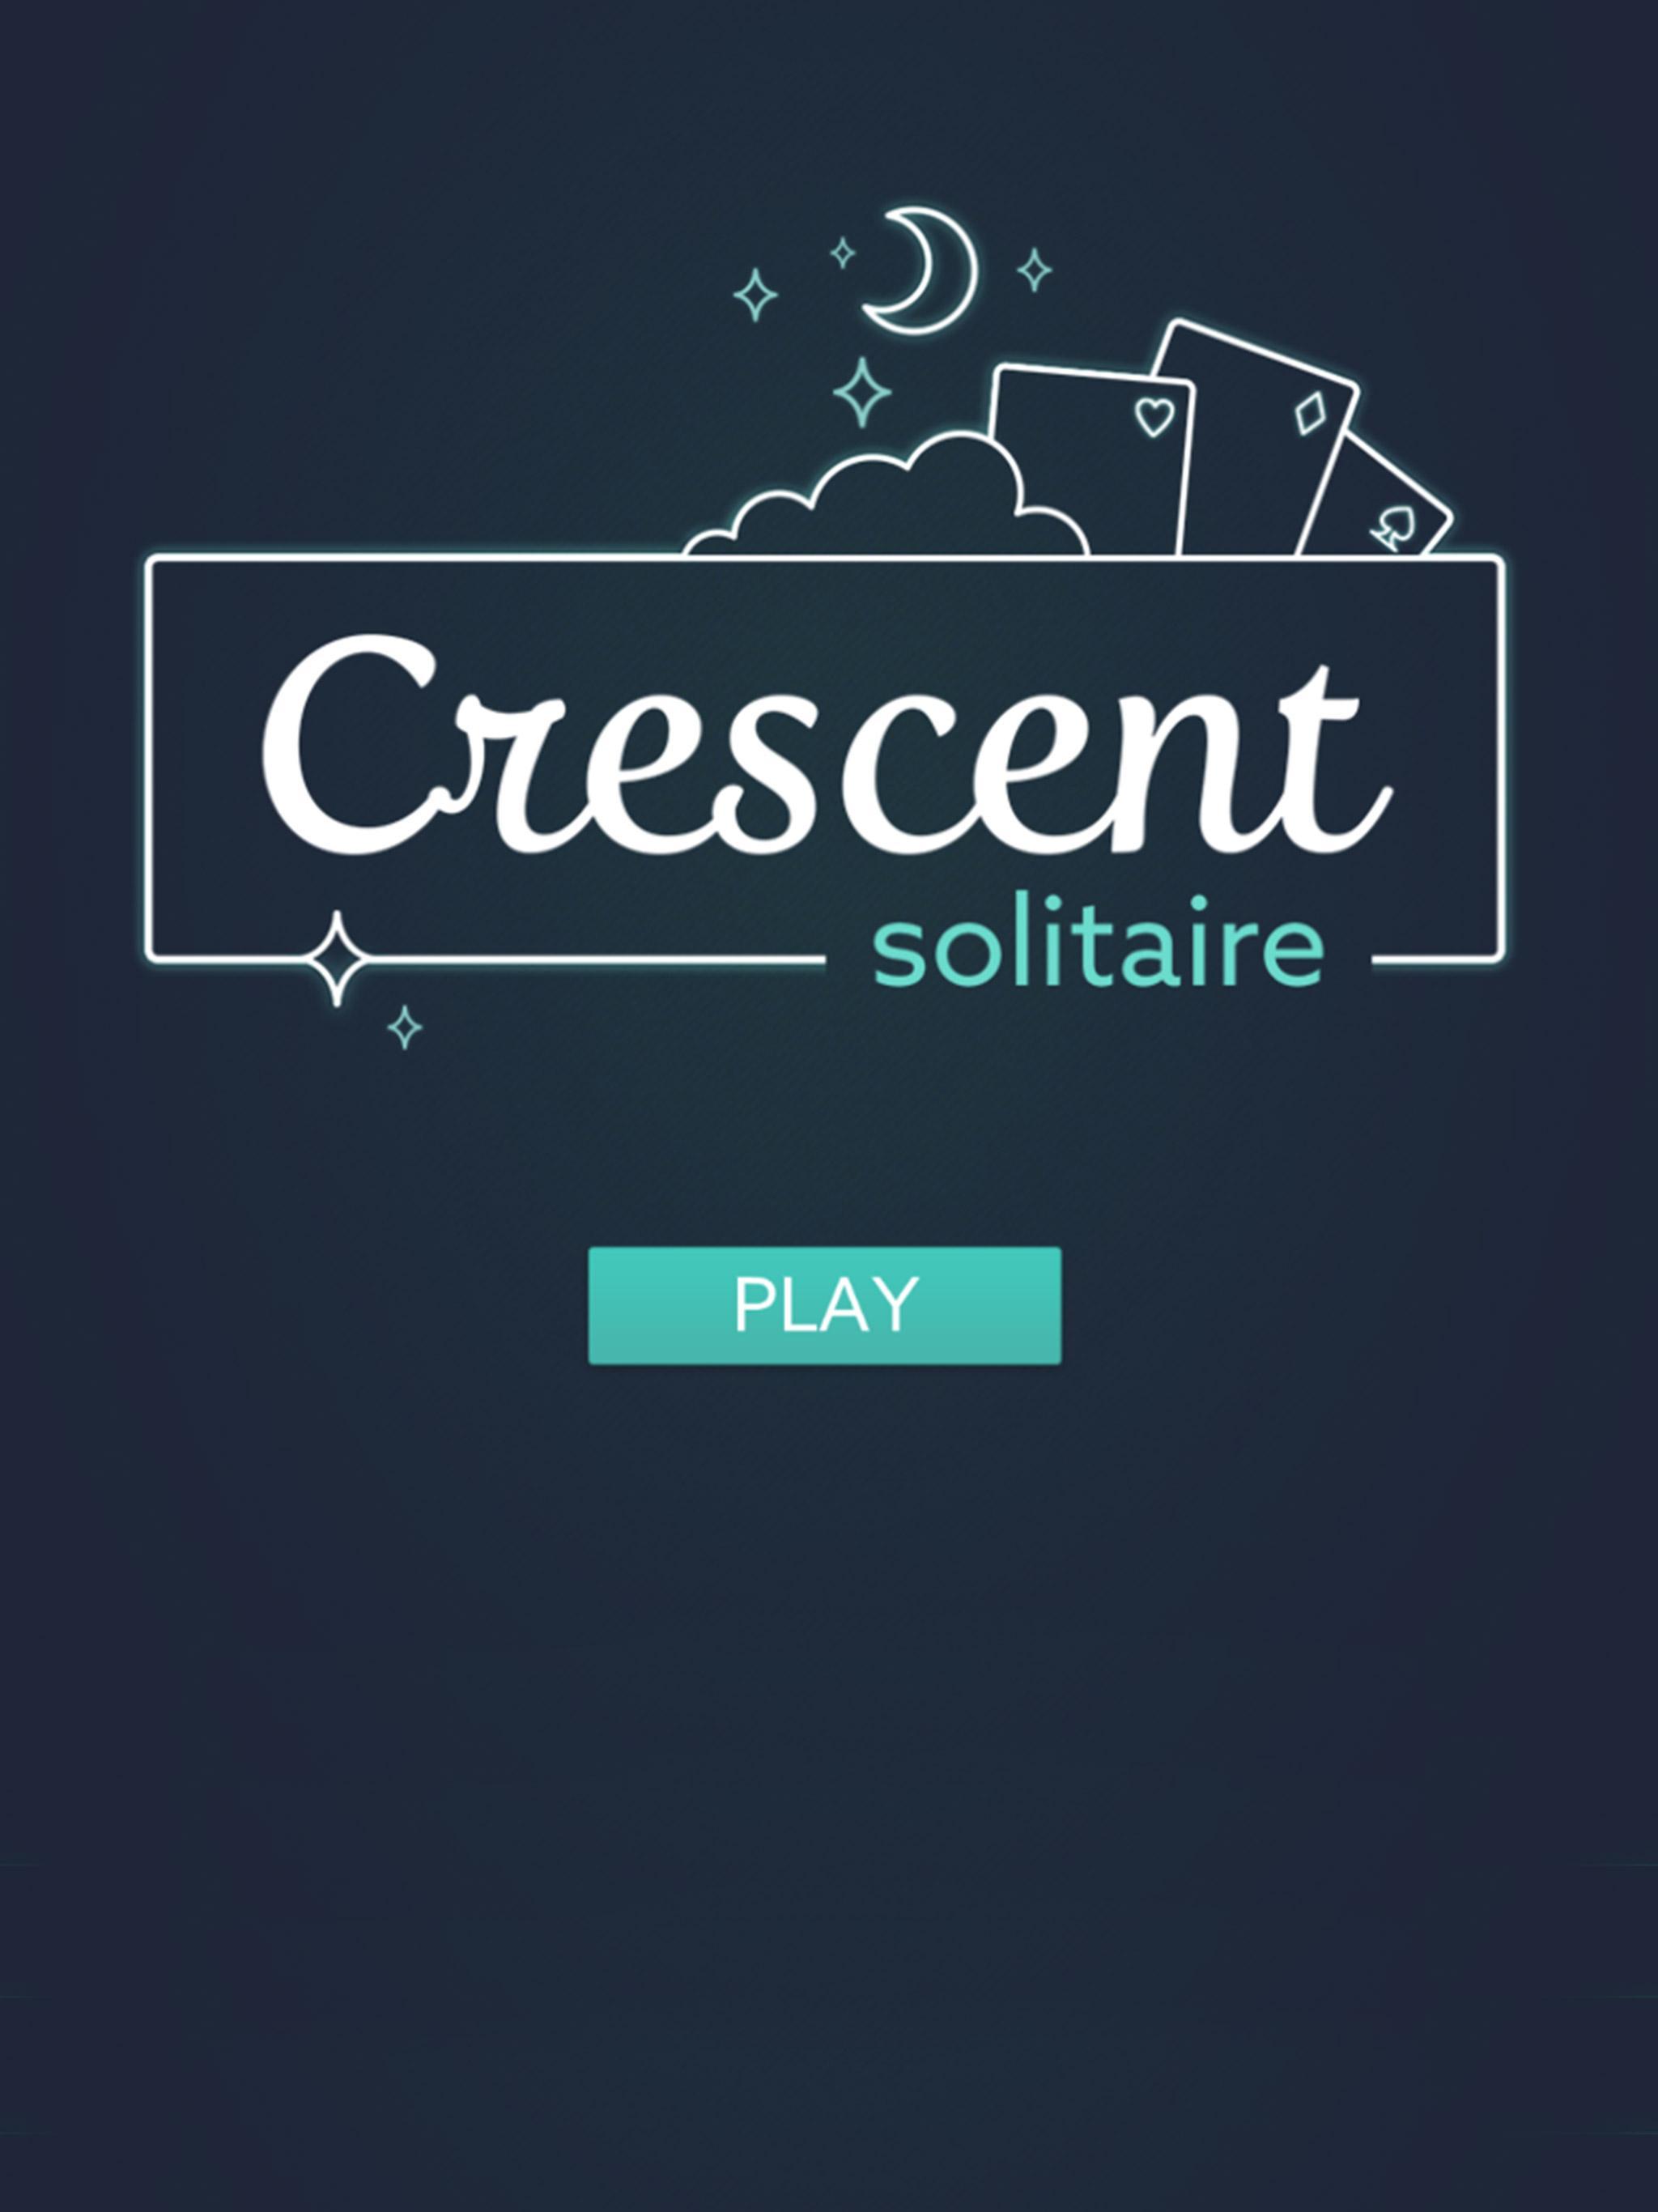 Crescent Solitaire for Android - APK Download